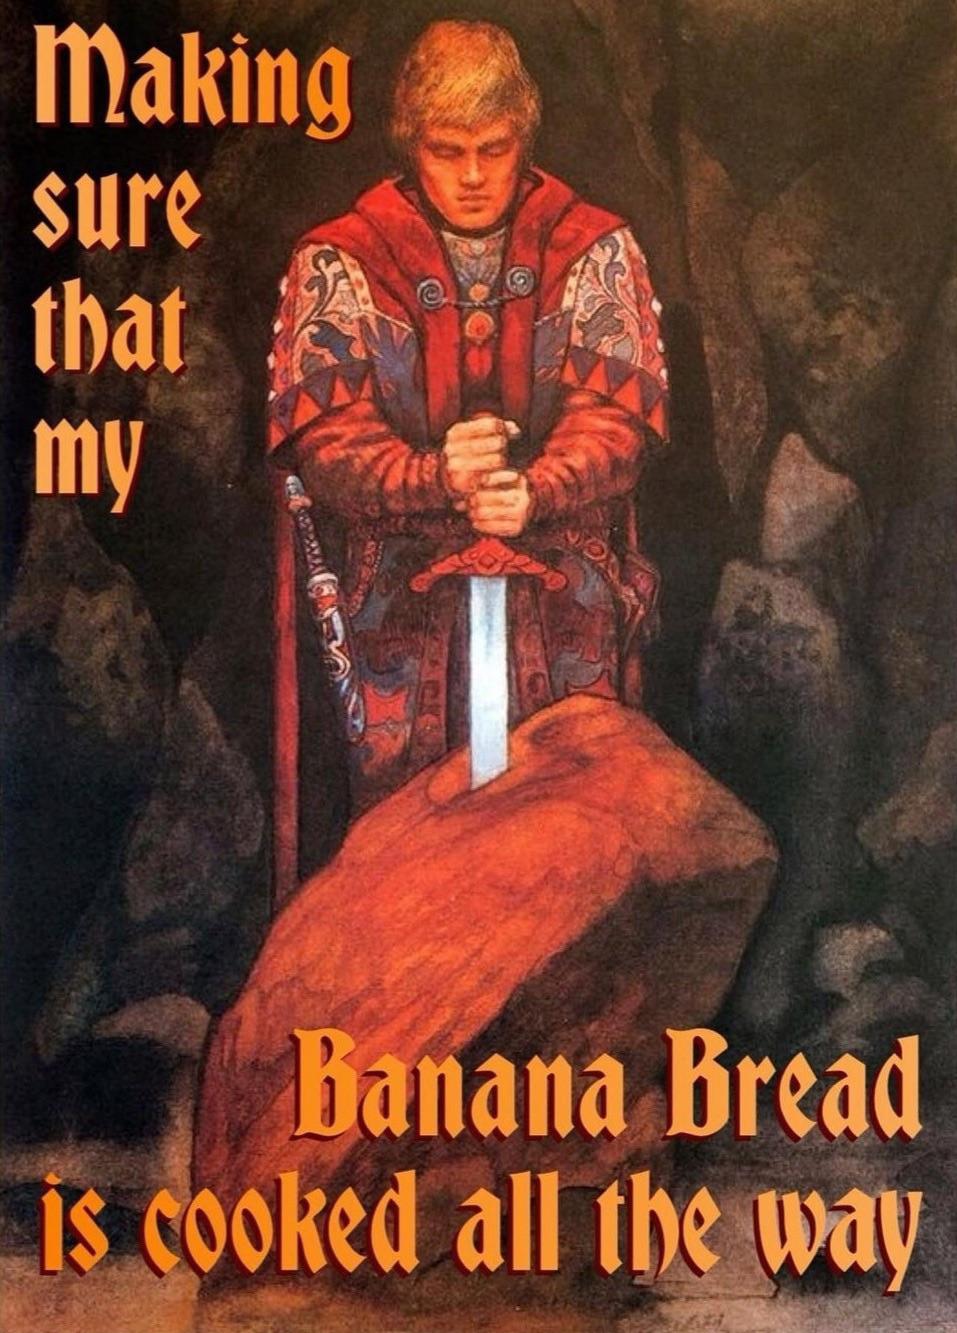 funny memes - create - Making sure that my Banana Bread is cooked all the way